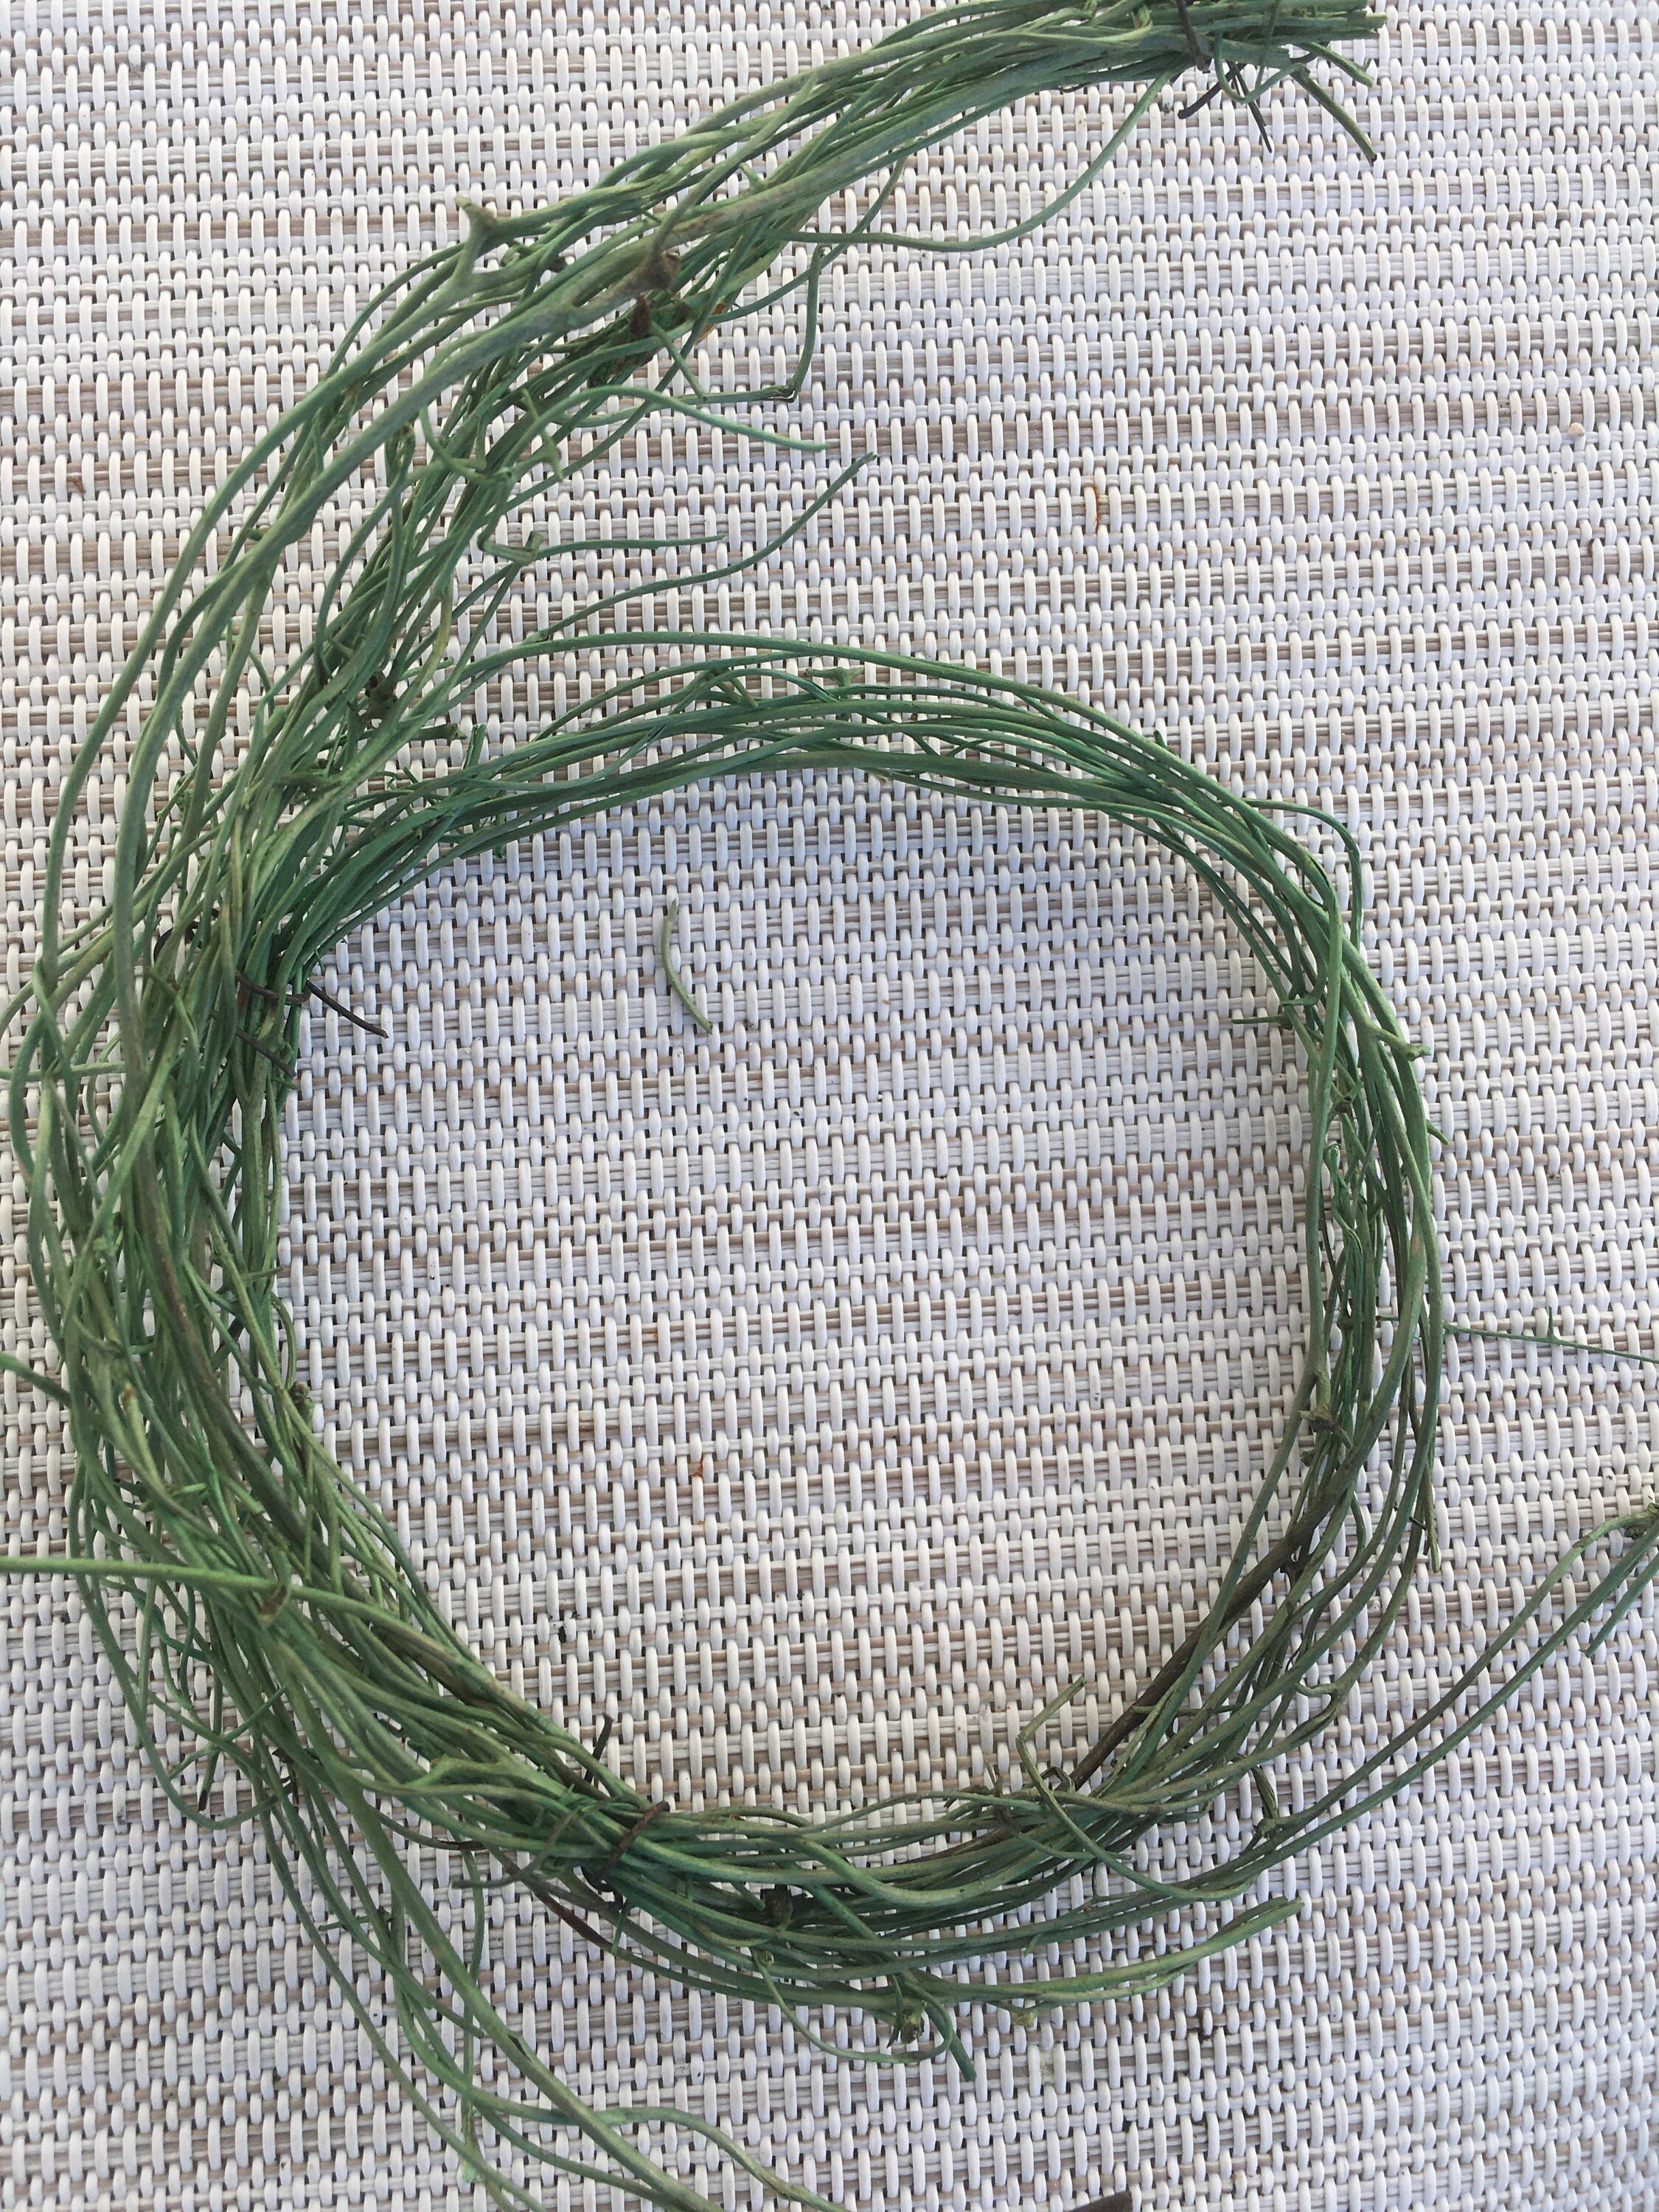 Grapevine Garland, Brushwood Garland 0.50 Cm, Basic Price 2, Euro / M for  Tinkering for the Doll's House, the Doll's House, Cribs, 